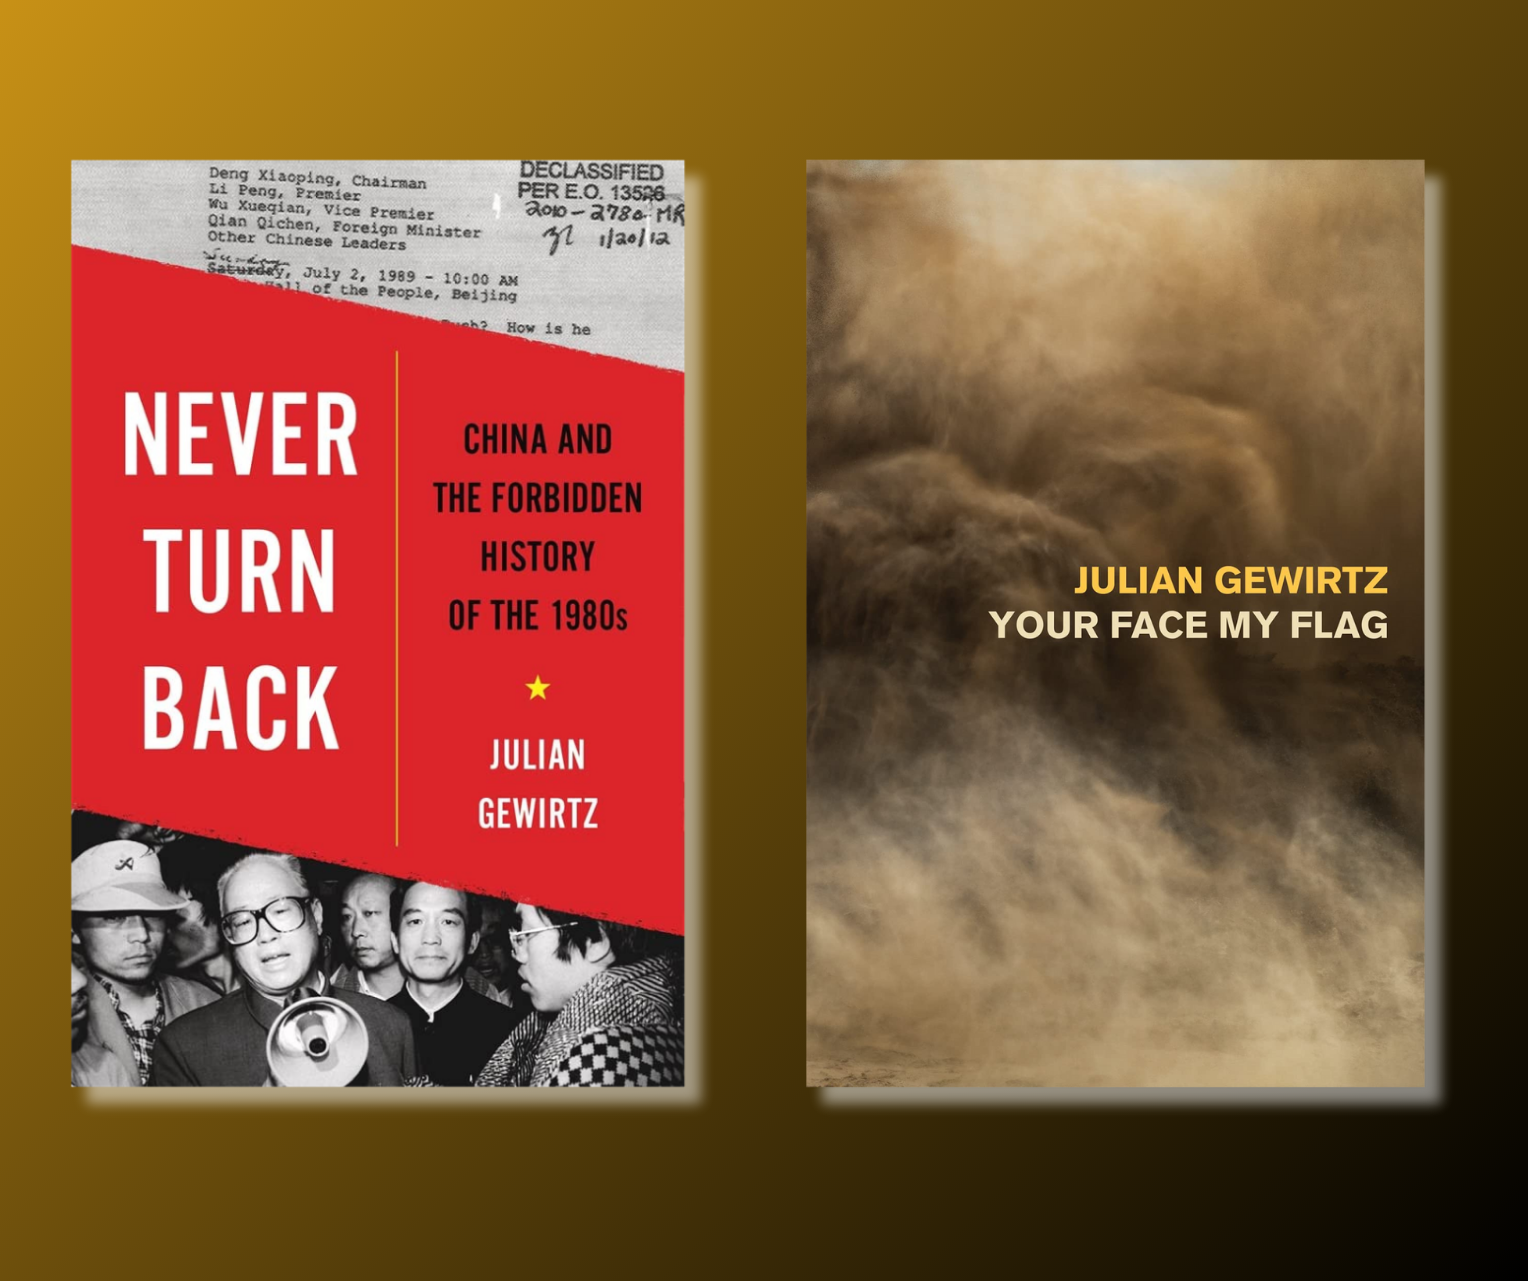 The Poet and the Historian: On Julian Gewirtz’s “Your Face My Flag” and “Never Turn Back”